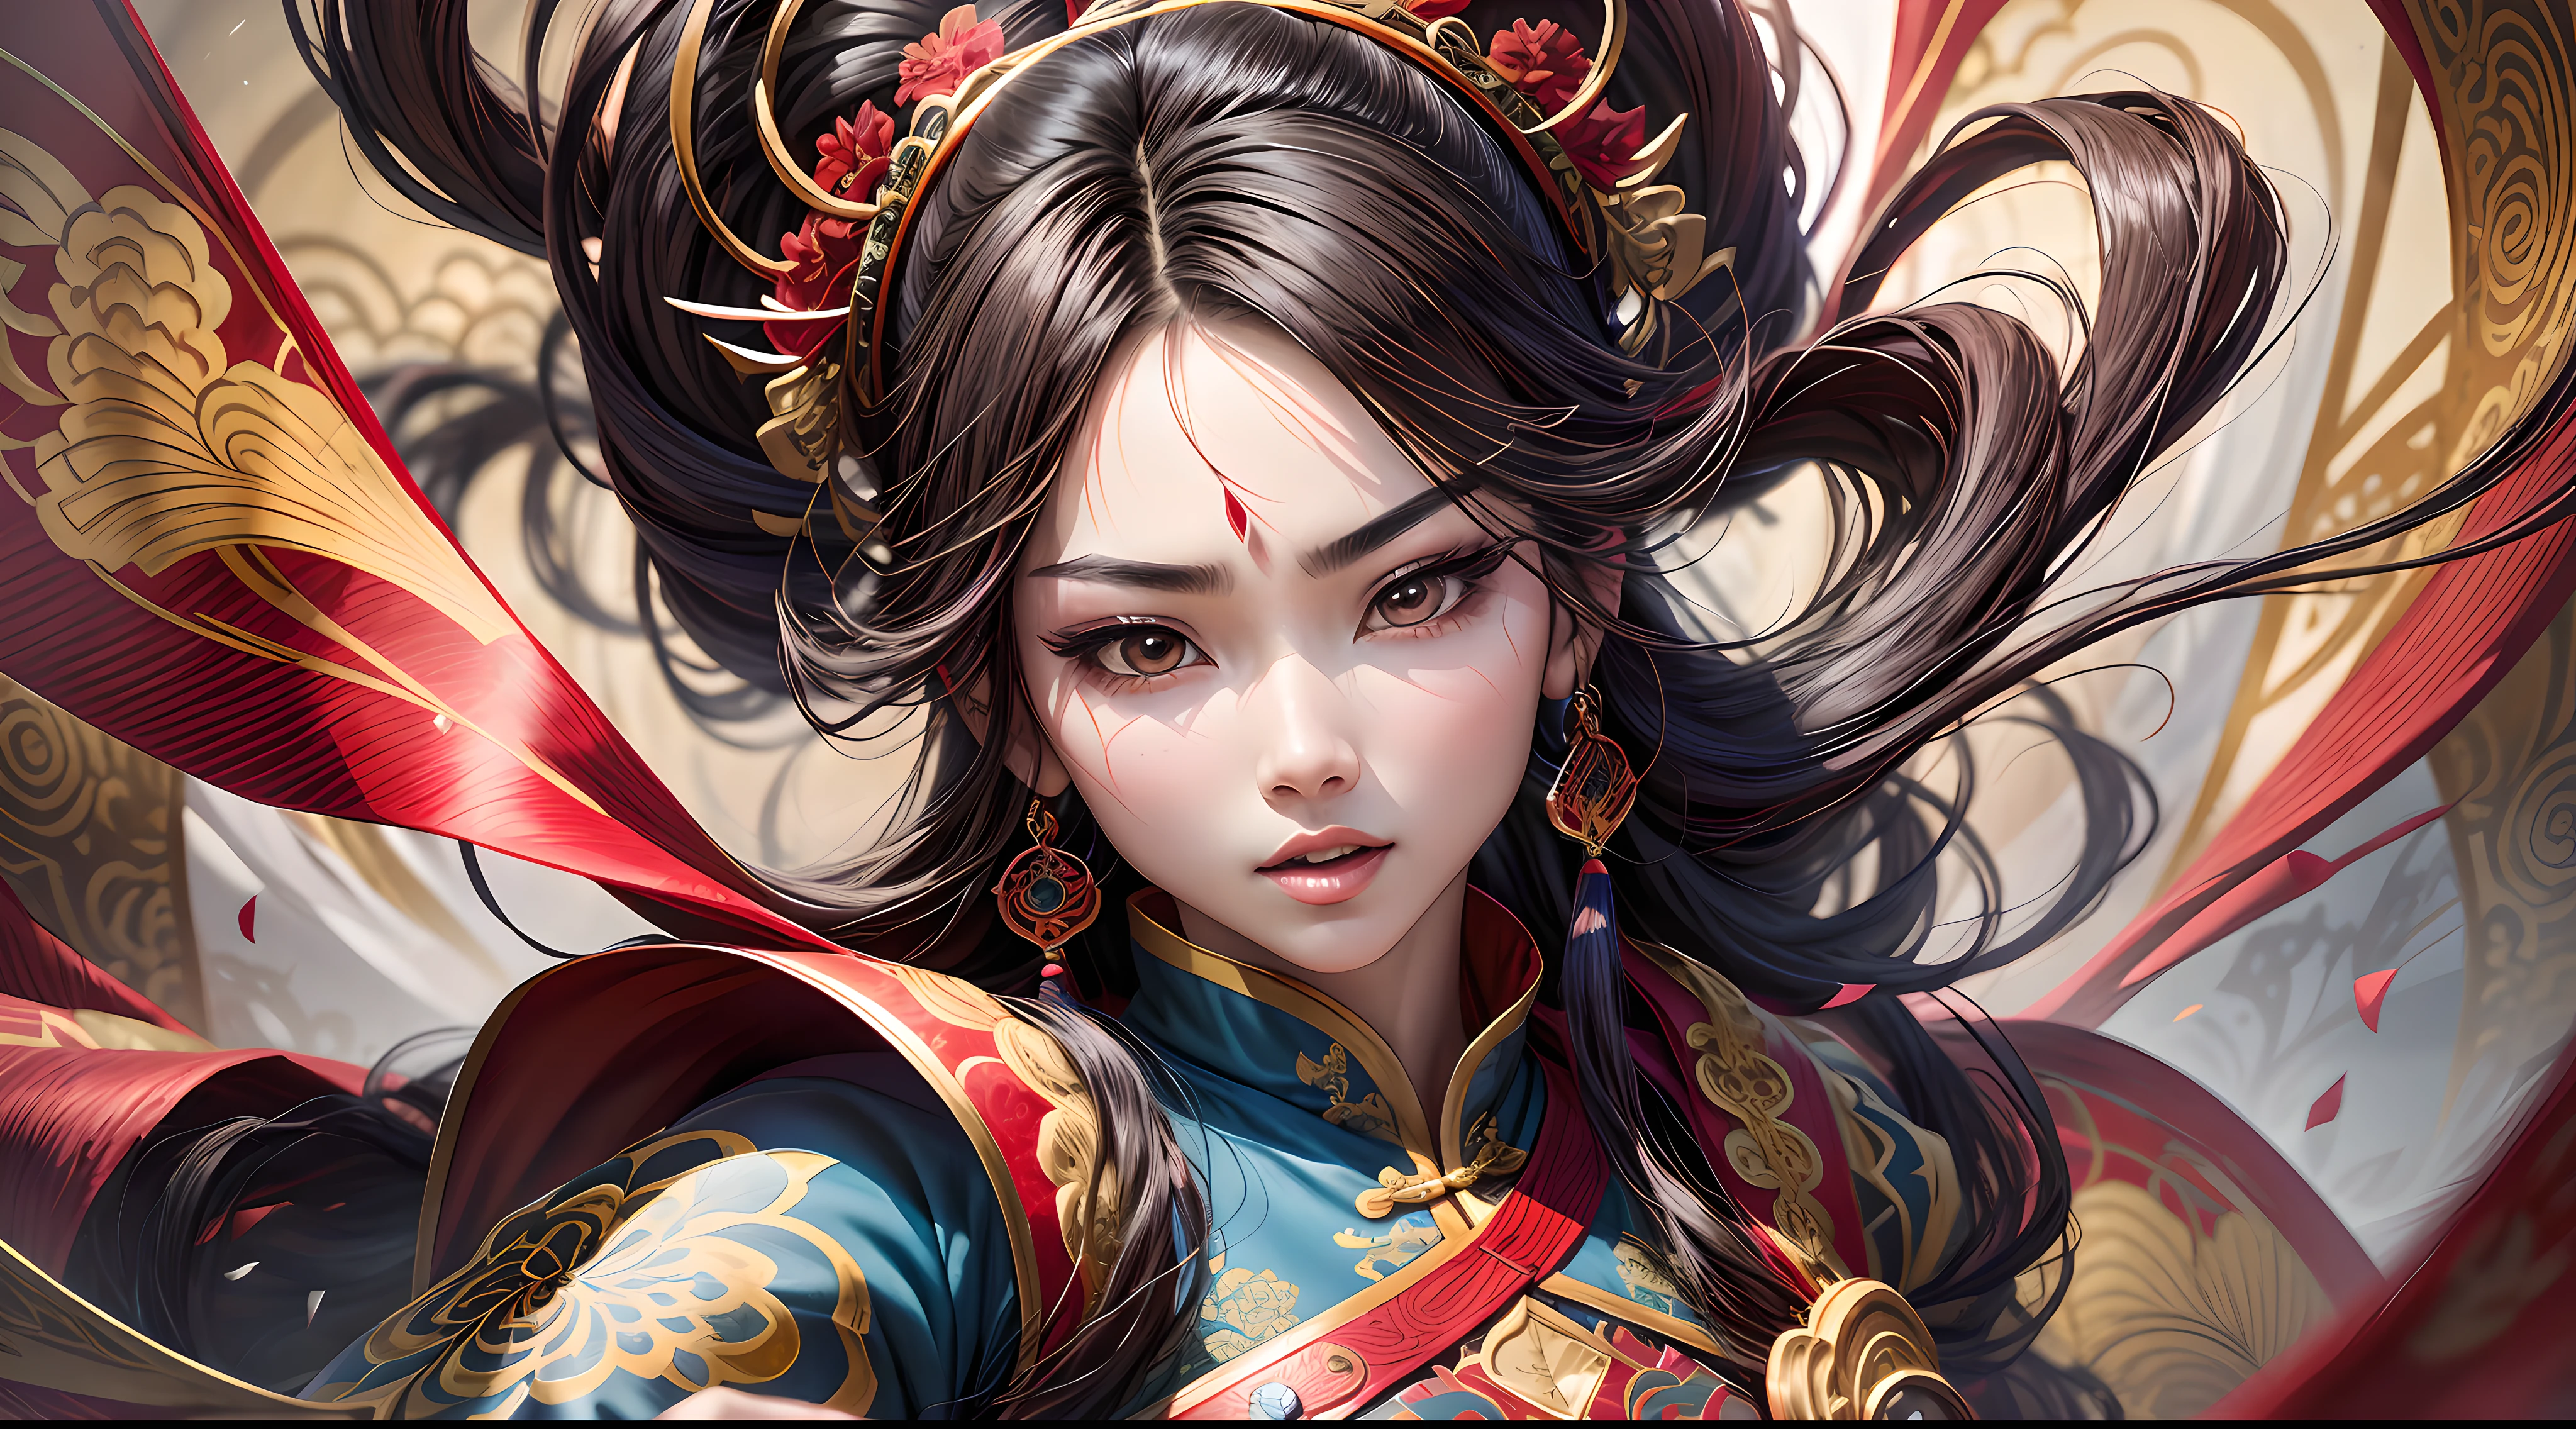 In the world of anime, a mesmerizing Chinese swordswoman comes to life with vibrant colors and vivid color blends. With a swift and determined motion, she dashes forward, her dynamic pose captivating the viewer's attention. Her flowing hair, adorned with delicate ornaments, adds a touch of elegance to her fierce demeanor. She wears an intricately designed traditional Chinese costume, vibrant in hues of crimson and gold, adorned with intricate embroidery and ornate patterns. The background is a fusion of energetic brushstrokes, blending vibrant colors to create a sense of movement and dynamism. Camera shot: close-up, Camera lens: sharp focus, Lighting: bold and vibrant, vivid color blend